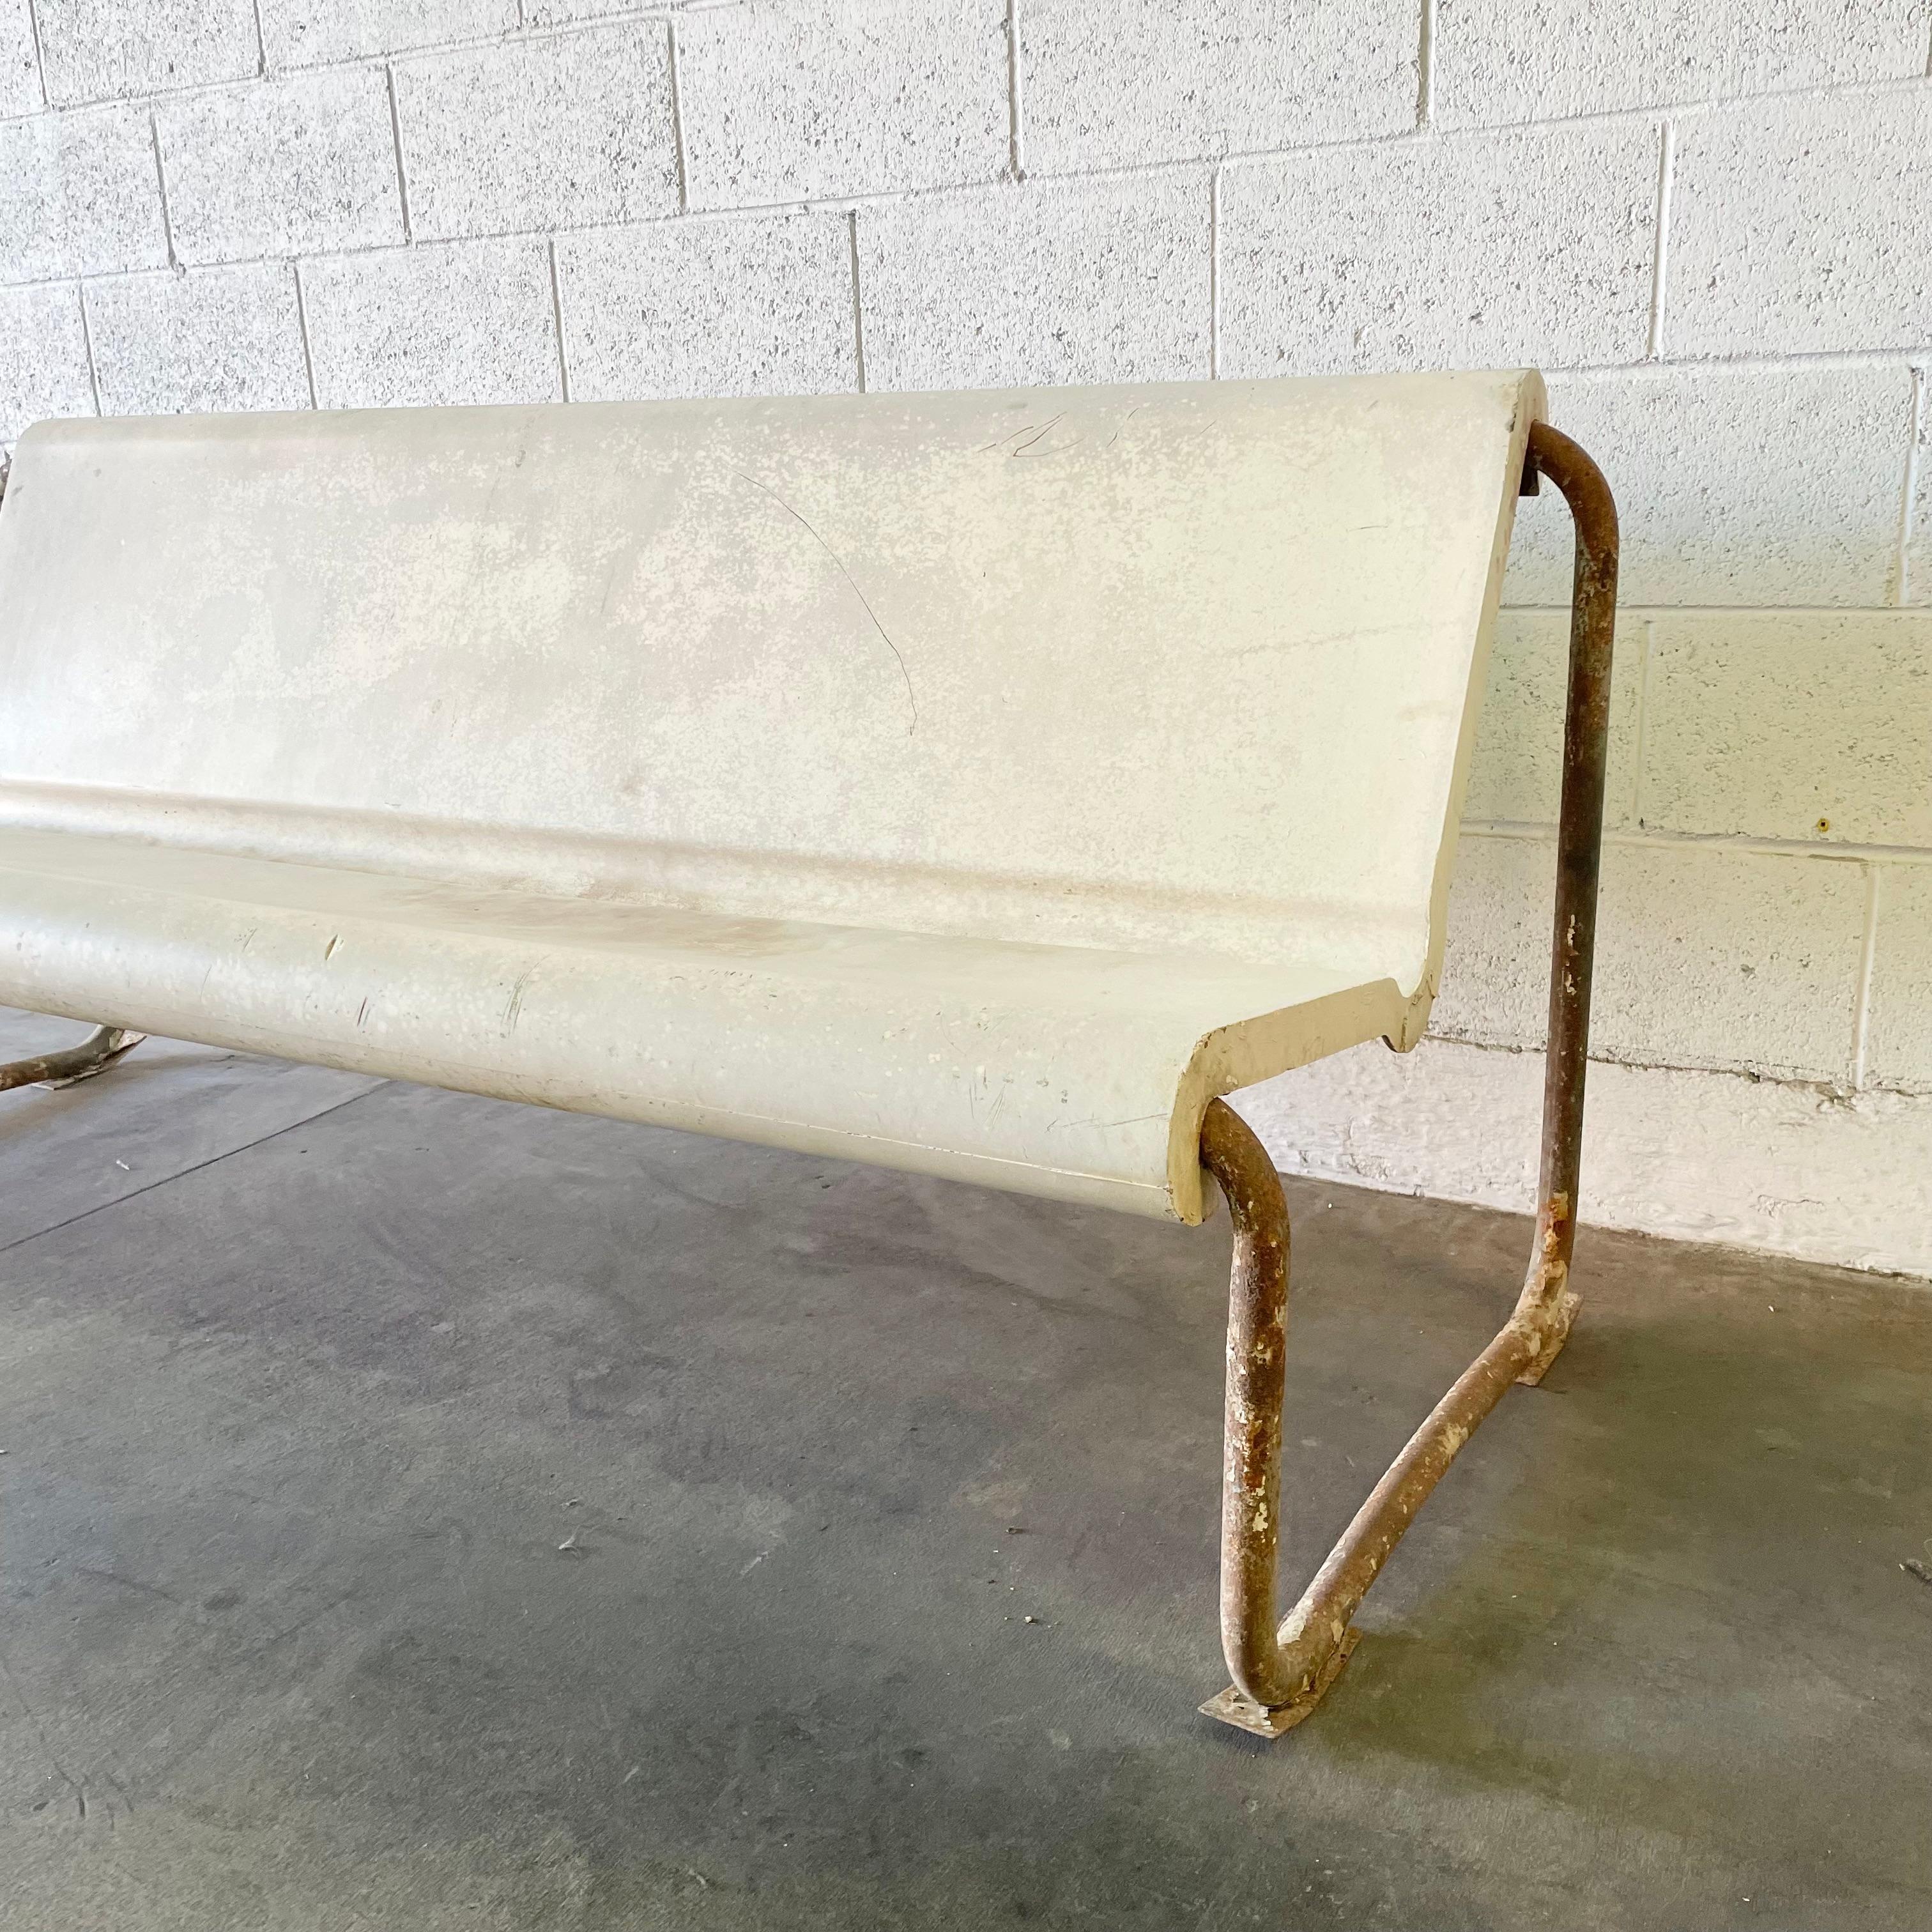 A remarkable midcentury floating bench by Swiss Architect Willy Guhl. Circa 1960s. Perfect minimal design as is common with the Swiss designer. The cream seat is made of fiberglass and is suspended by a tubular metal frame. Incredible patina to both